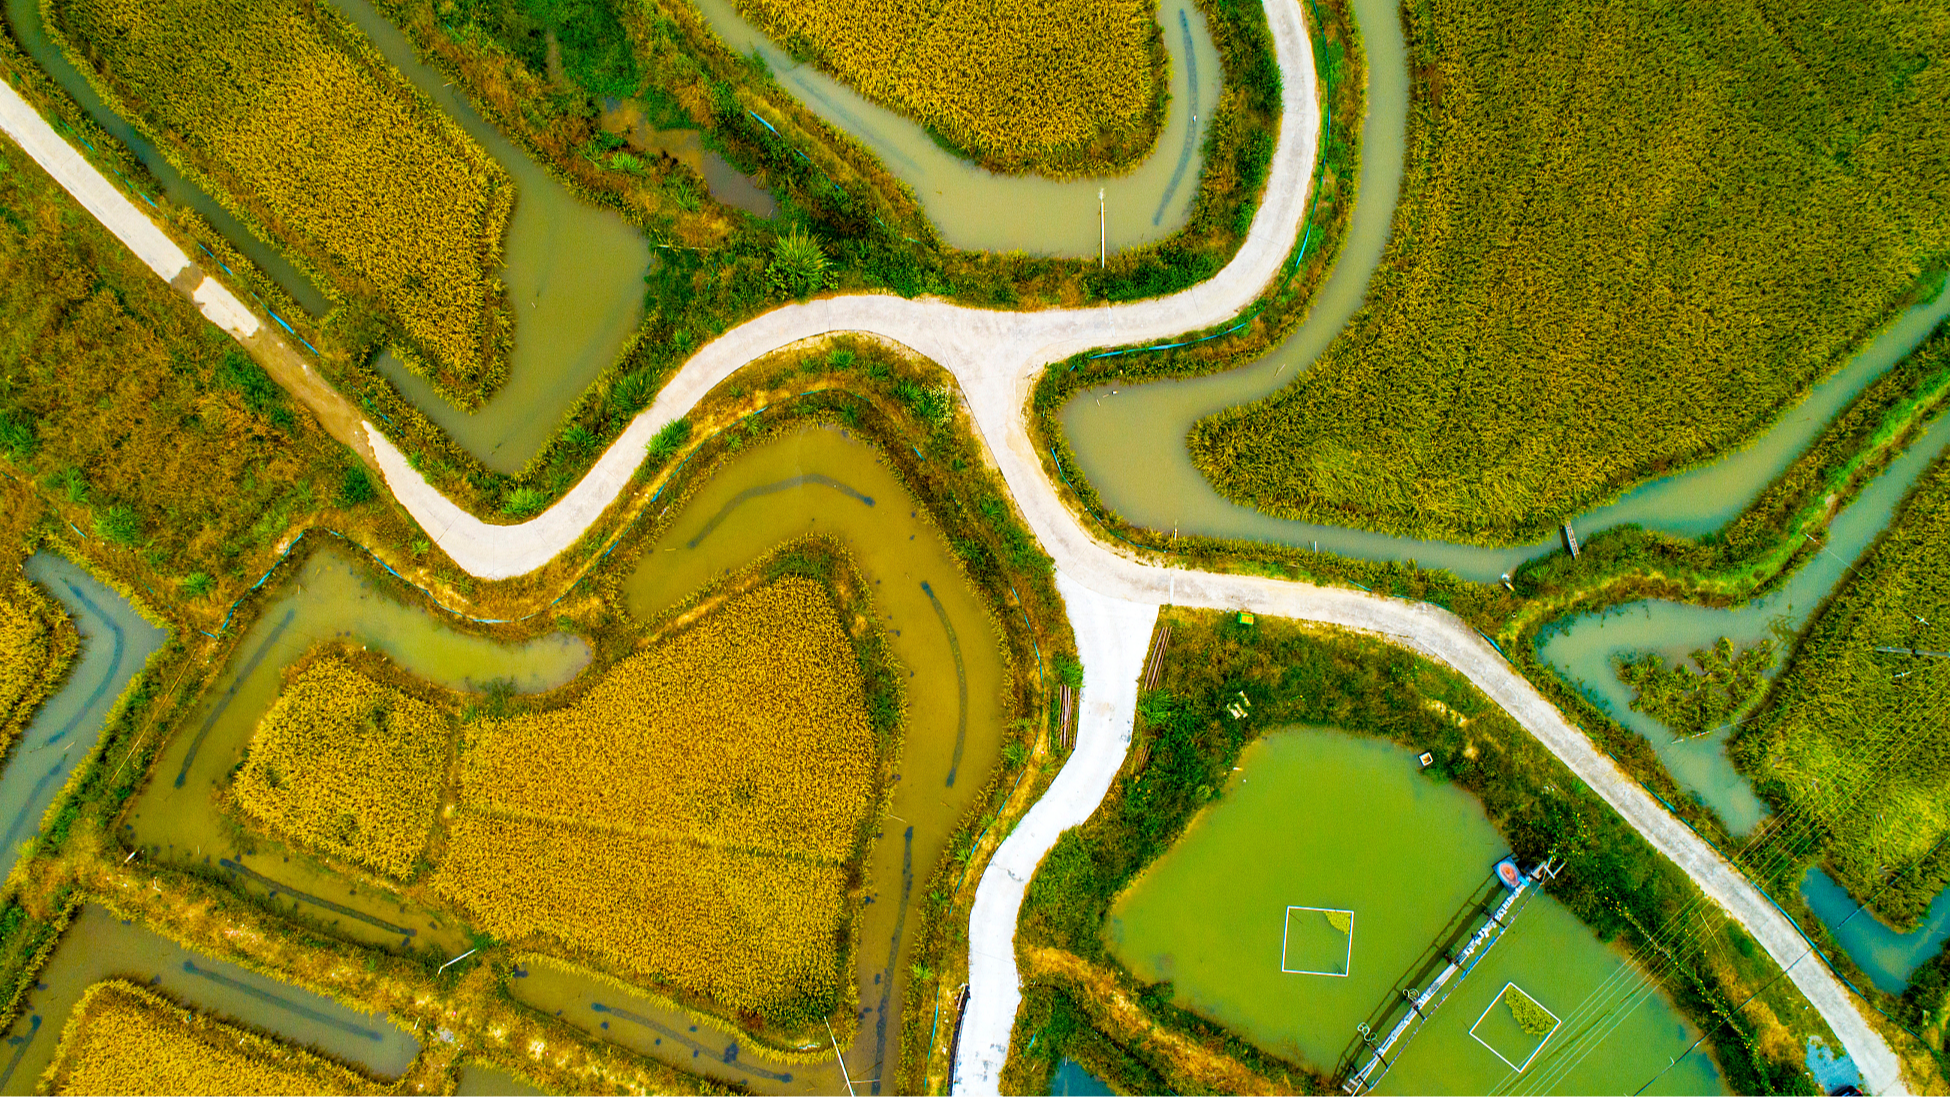 A bird's eye view of rural roads winding through forests and fields in Dehua County, Quanzhou City, southeast China's Fujian Province, October 6, 2020. /CFP